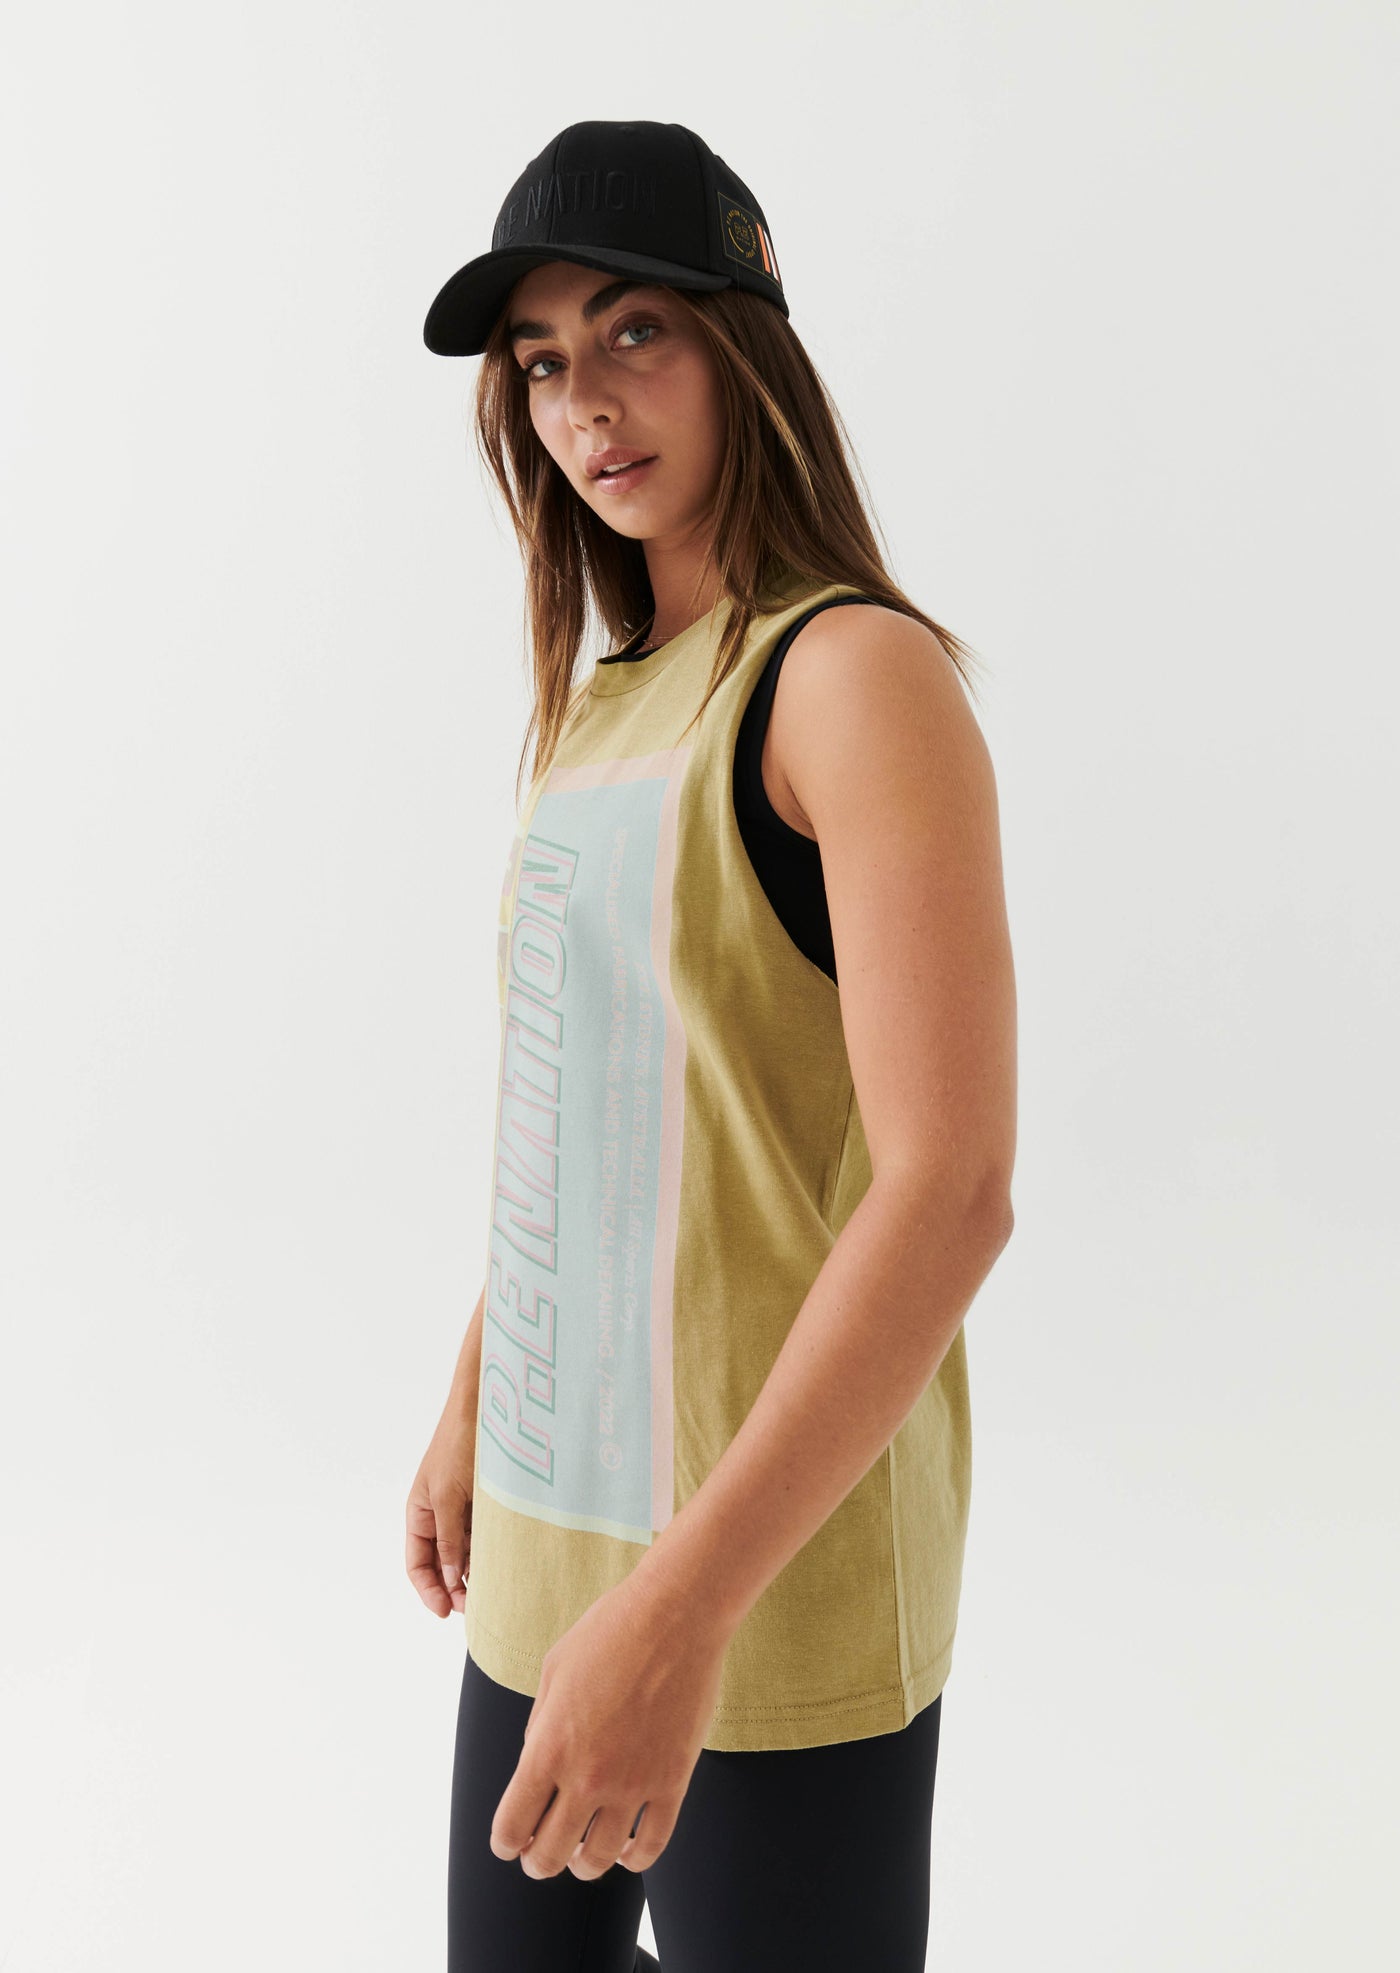 ALIGNMENT TANK IN OLIVE GRAY